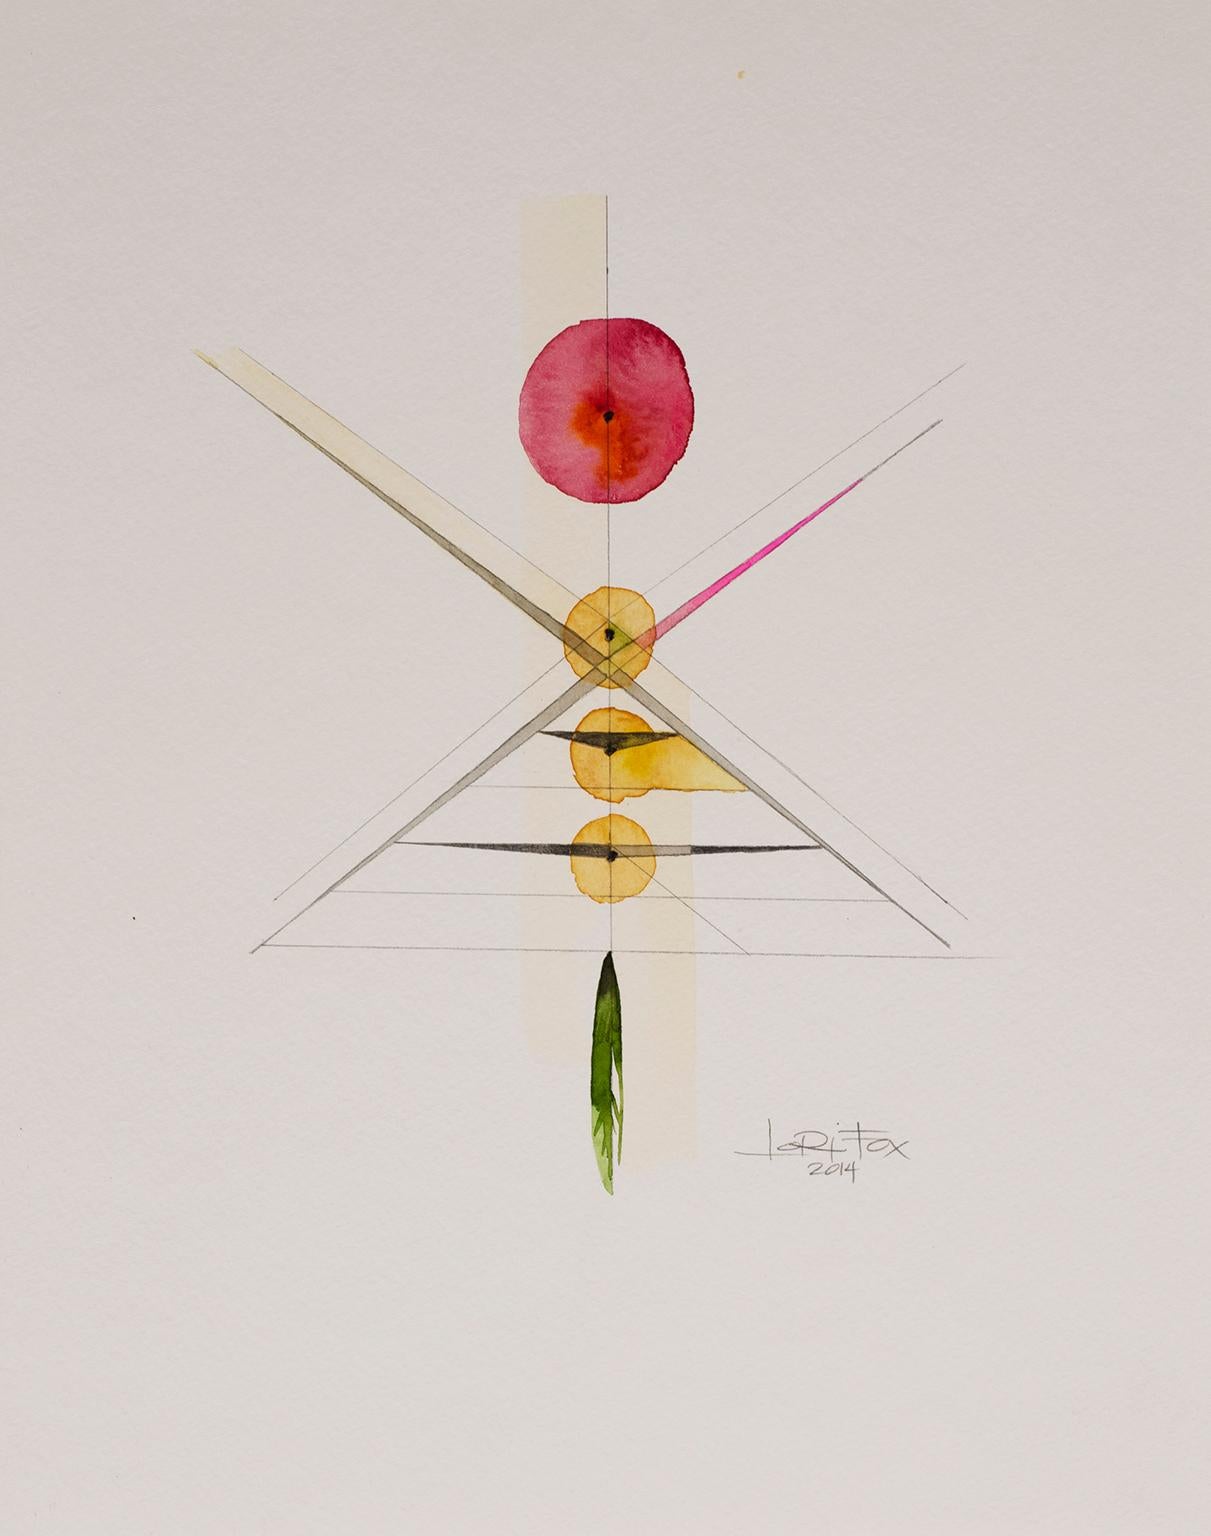 Totem 2.011, 2014 by Lori Fox
Watercolor and graphite on paper. 
14 x 11 inch unframed.  
Framed size is 15.25 x 12.25 x 1.75 inch (ask about framed price)
Red, yellow and green colors make this original from the Totem series by Lori Fox. 

Totem: 